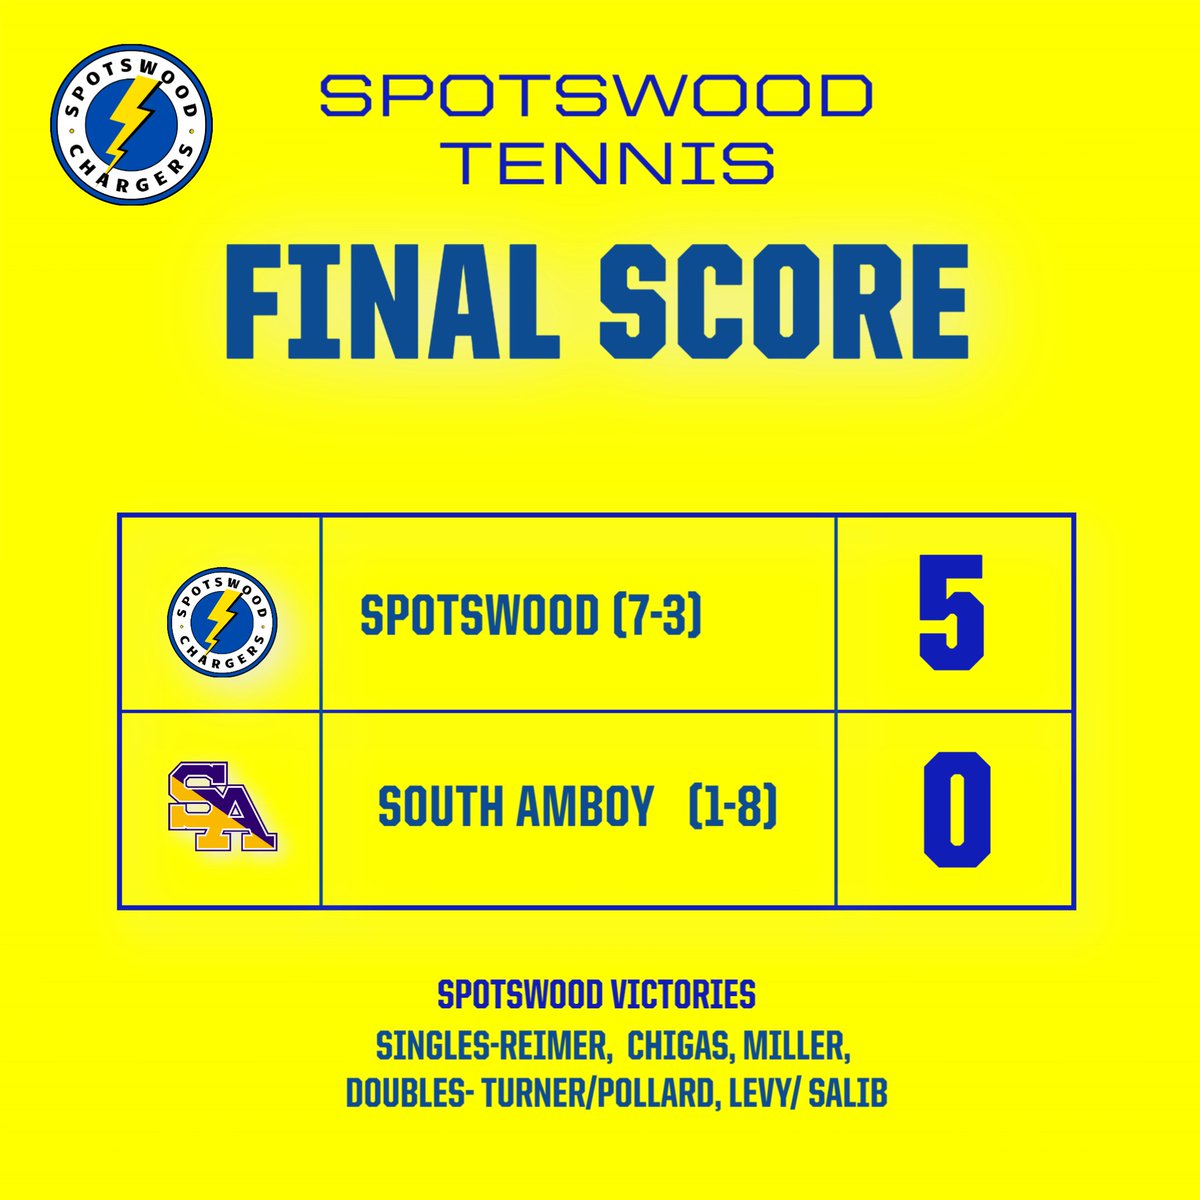 Spotswood improves to 7-3 on the season with the victory over South Amboy. highschoolsports.nj.com/game/934458